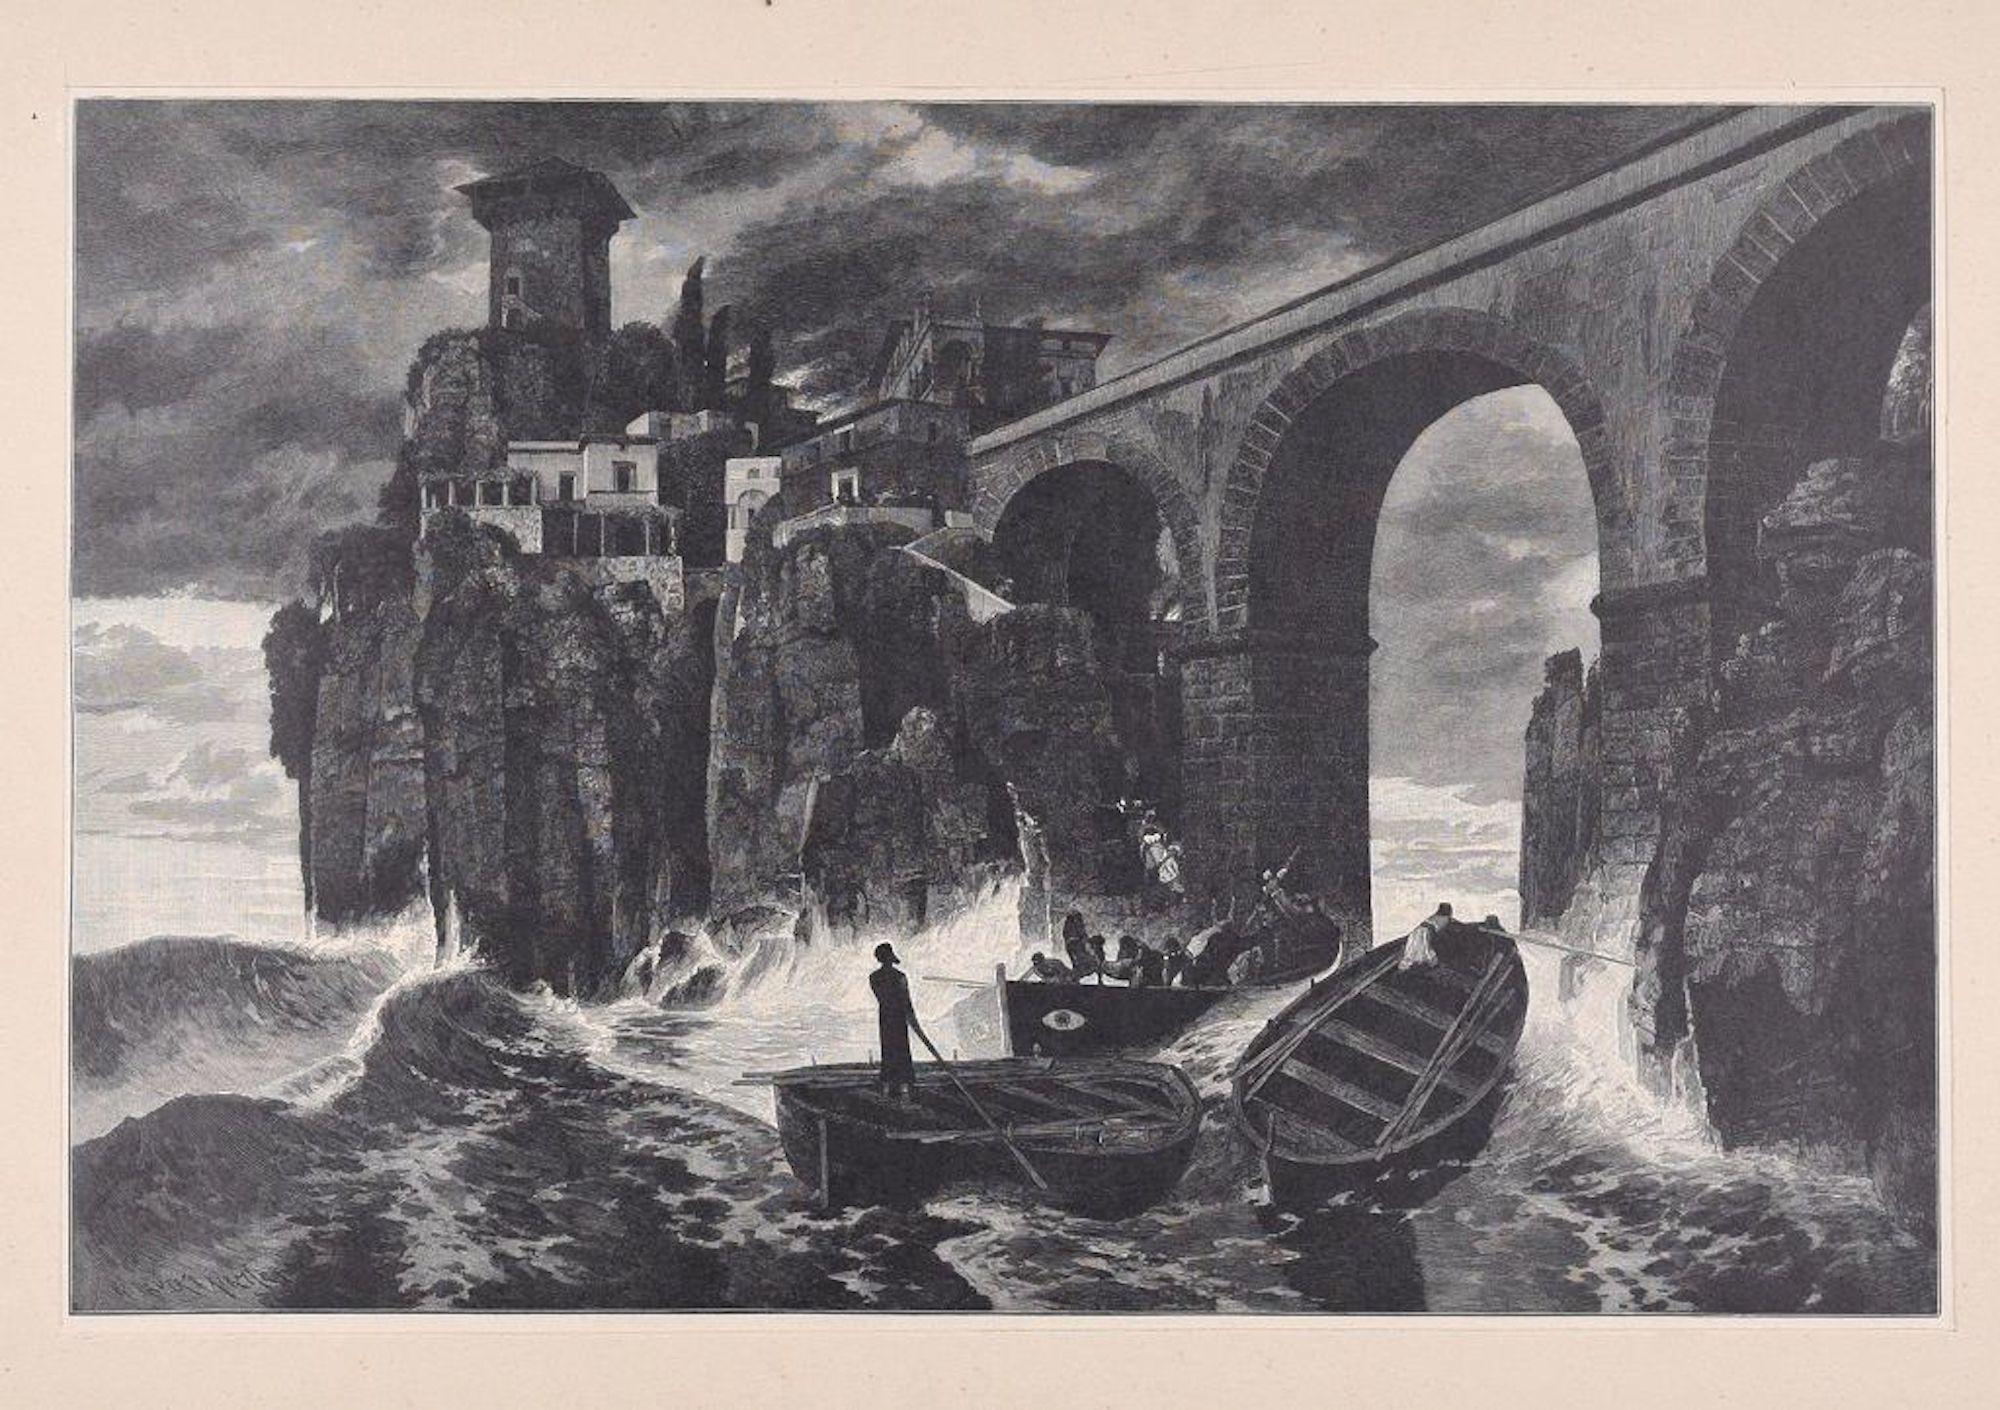 Arnold Bocklin (After) Figurative Print - Pirates attack the Castle on the Sea - Original Woodcut by J.J. Weber - 1898